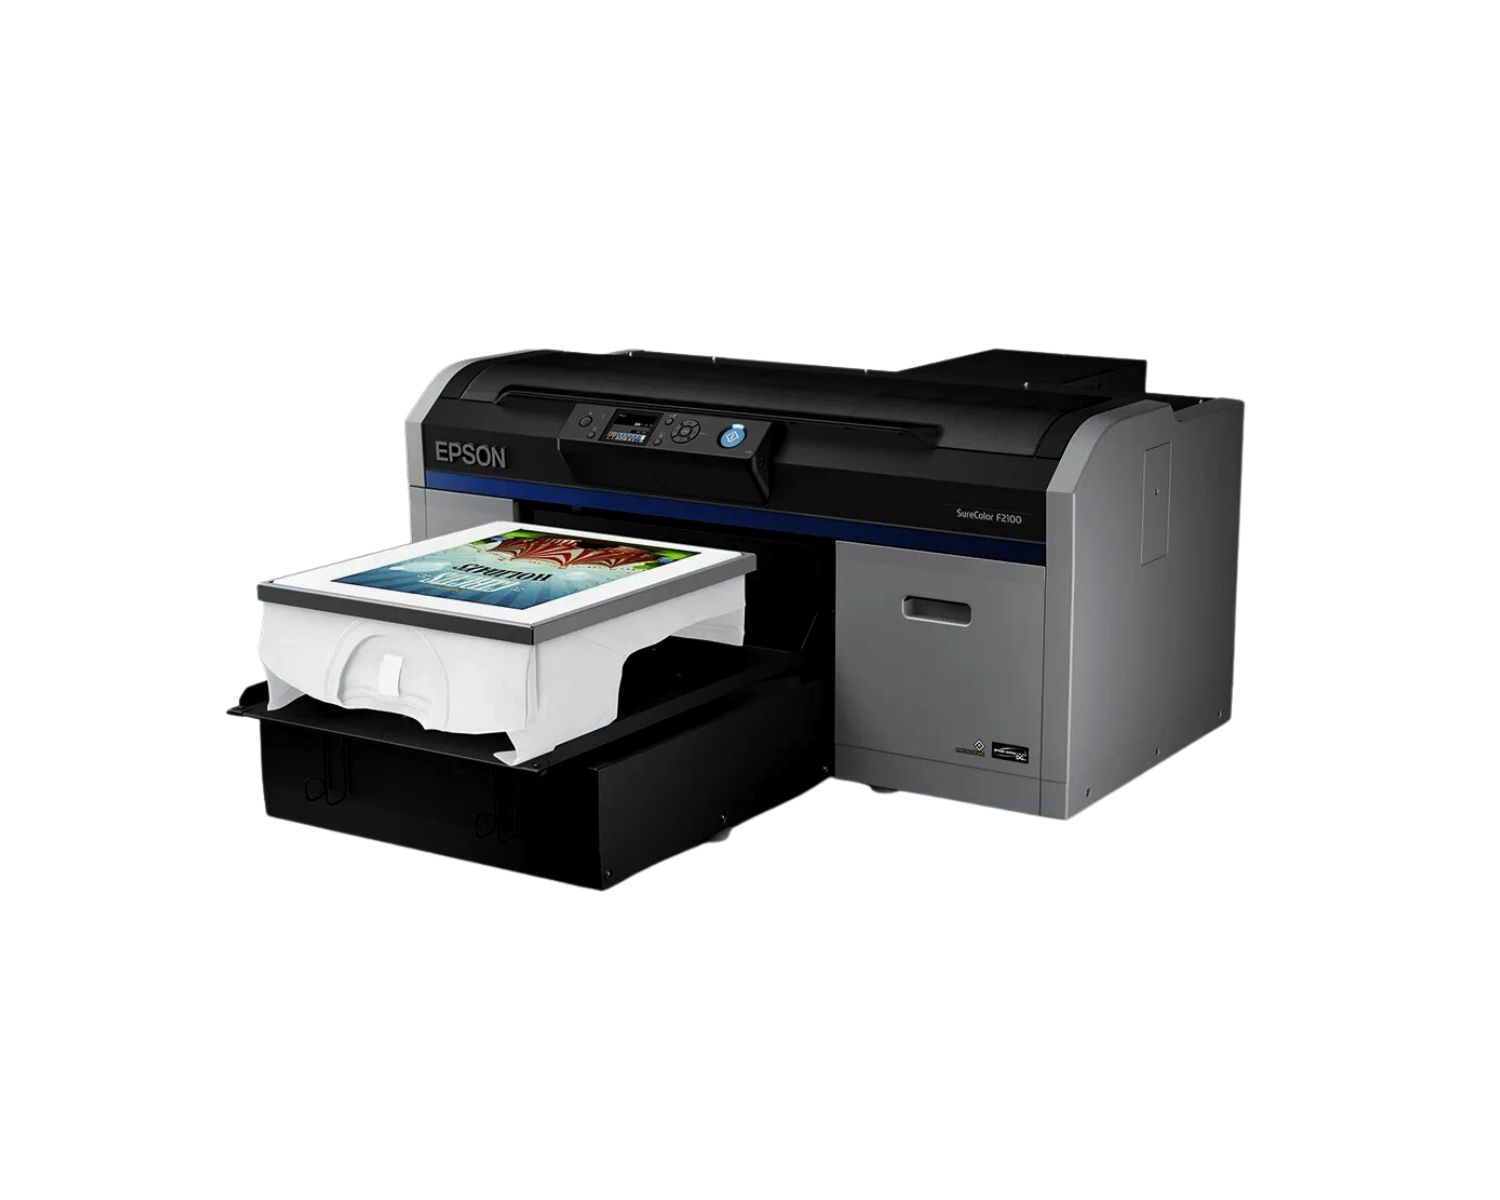 How To Add Epson Printer